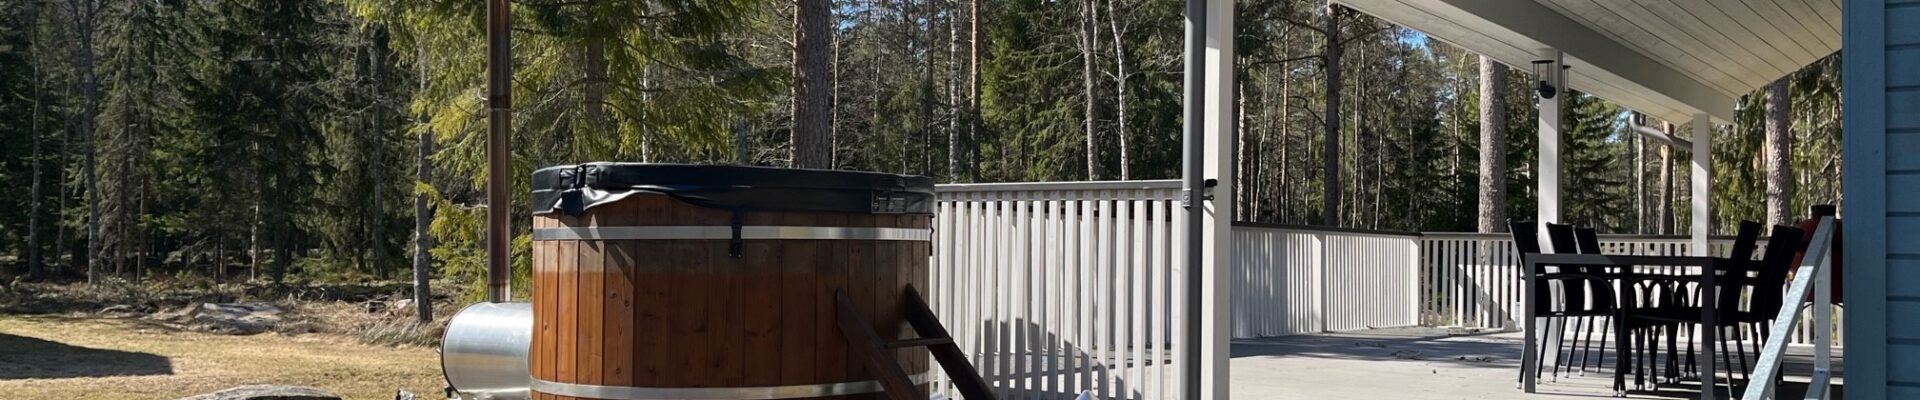 Cottage and a Hot Tub in Finland-Villa Merikoivula